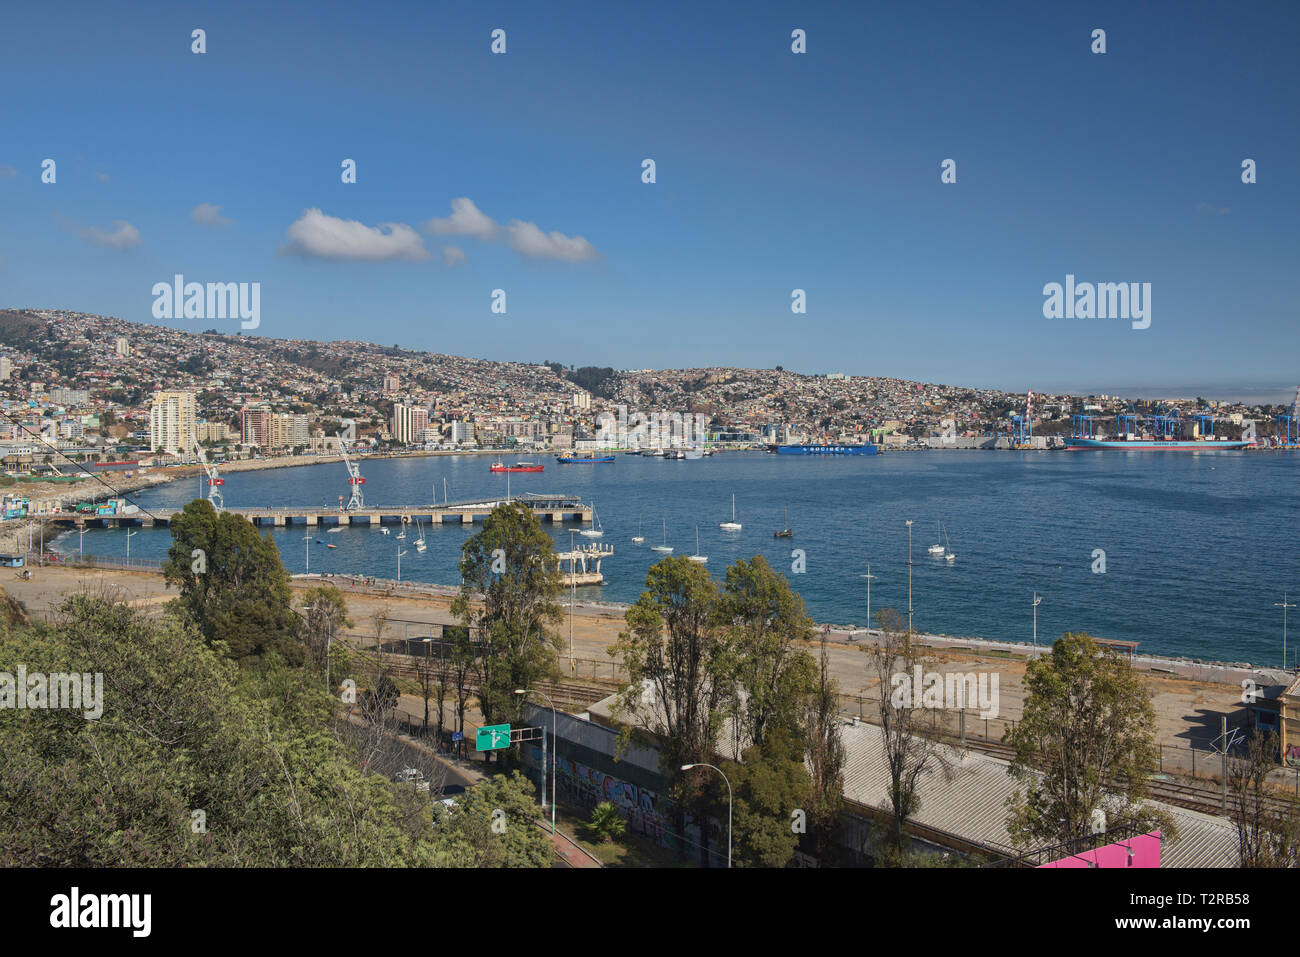 View of the city and bay, Valparaiso, Chile Stock Photo